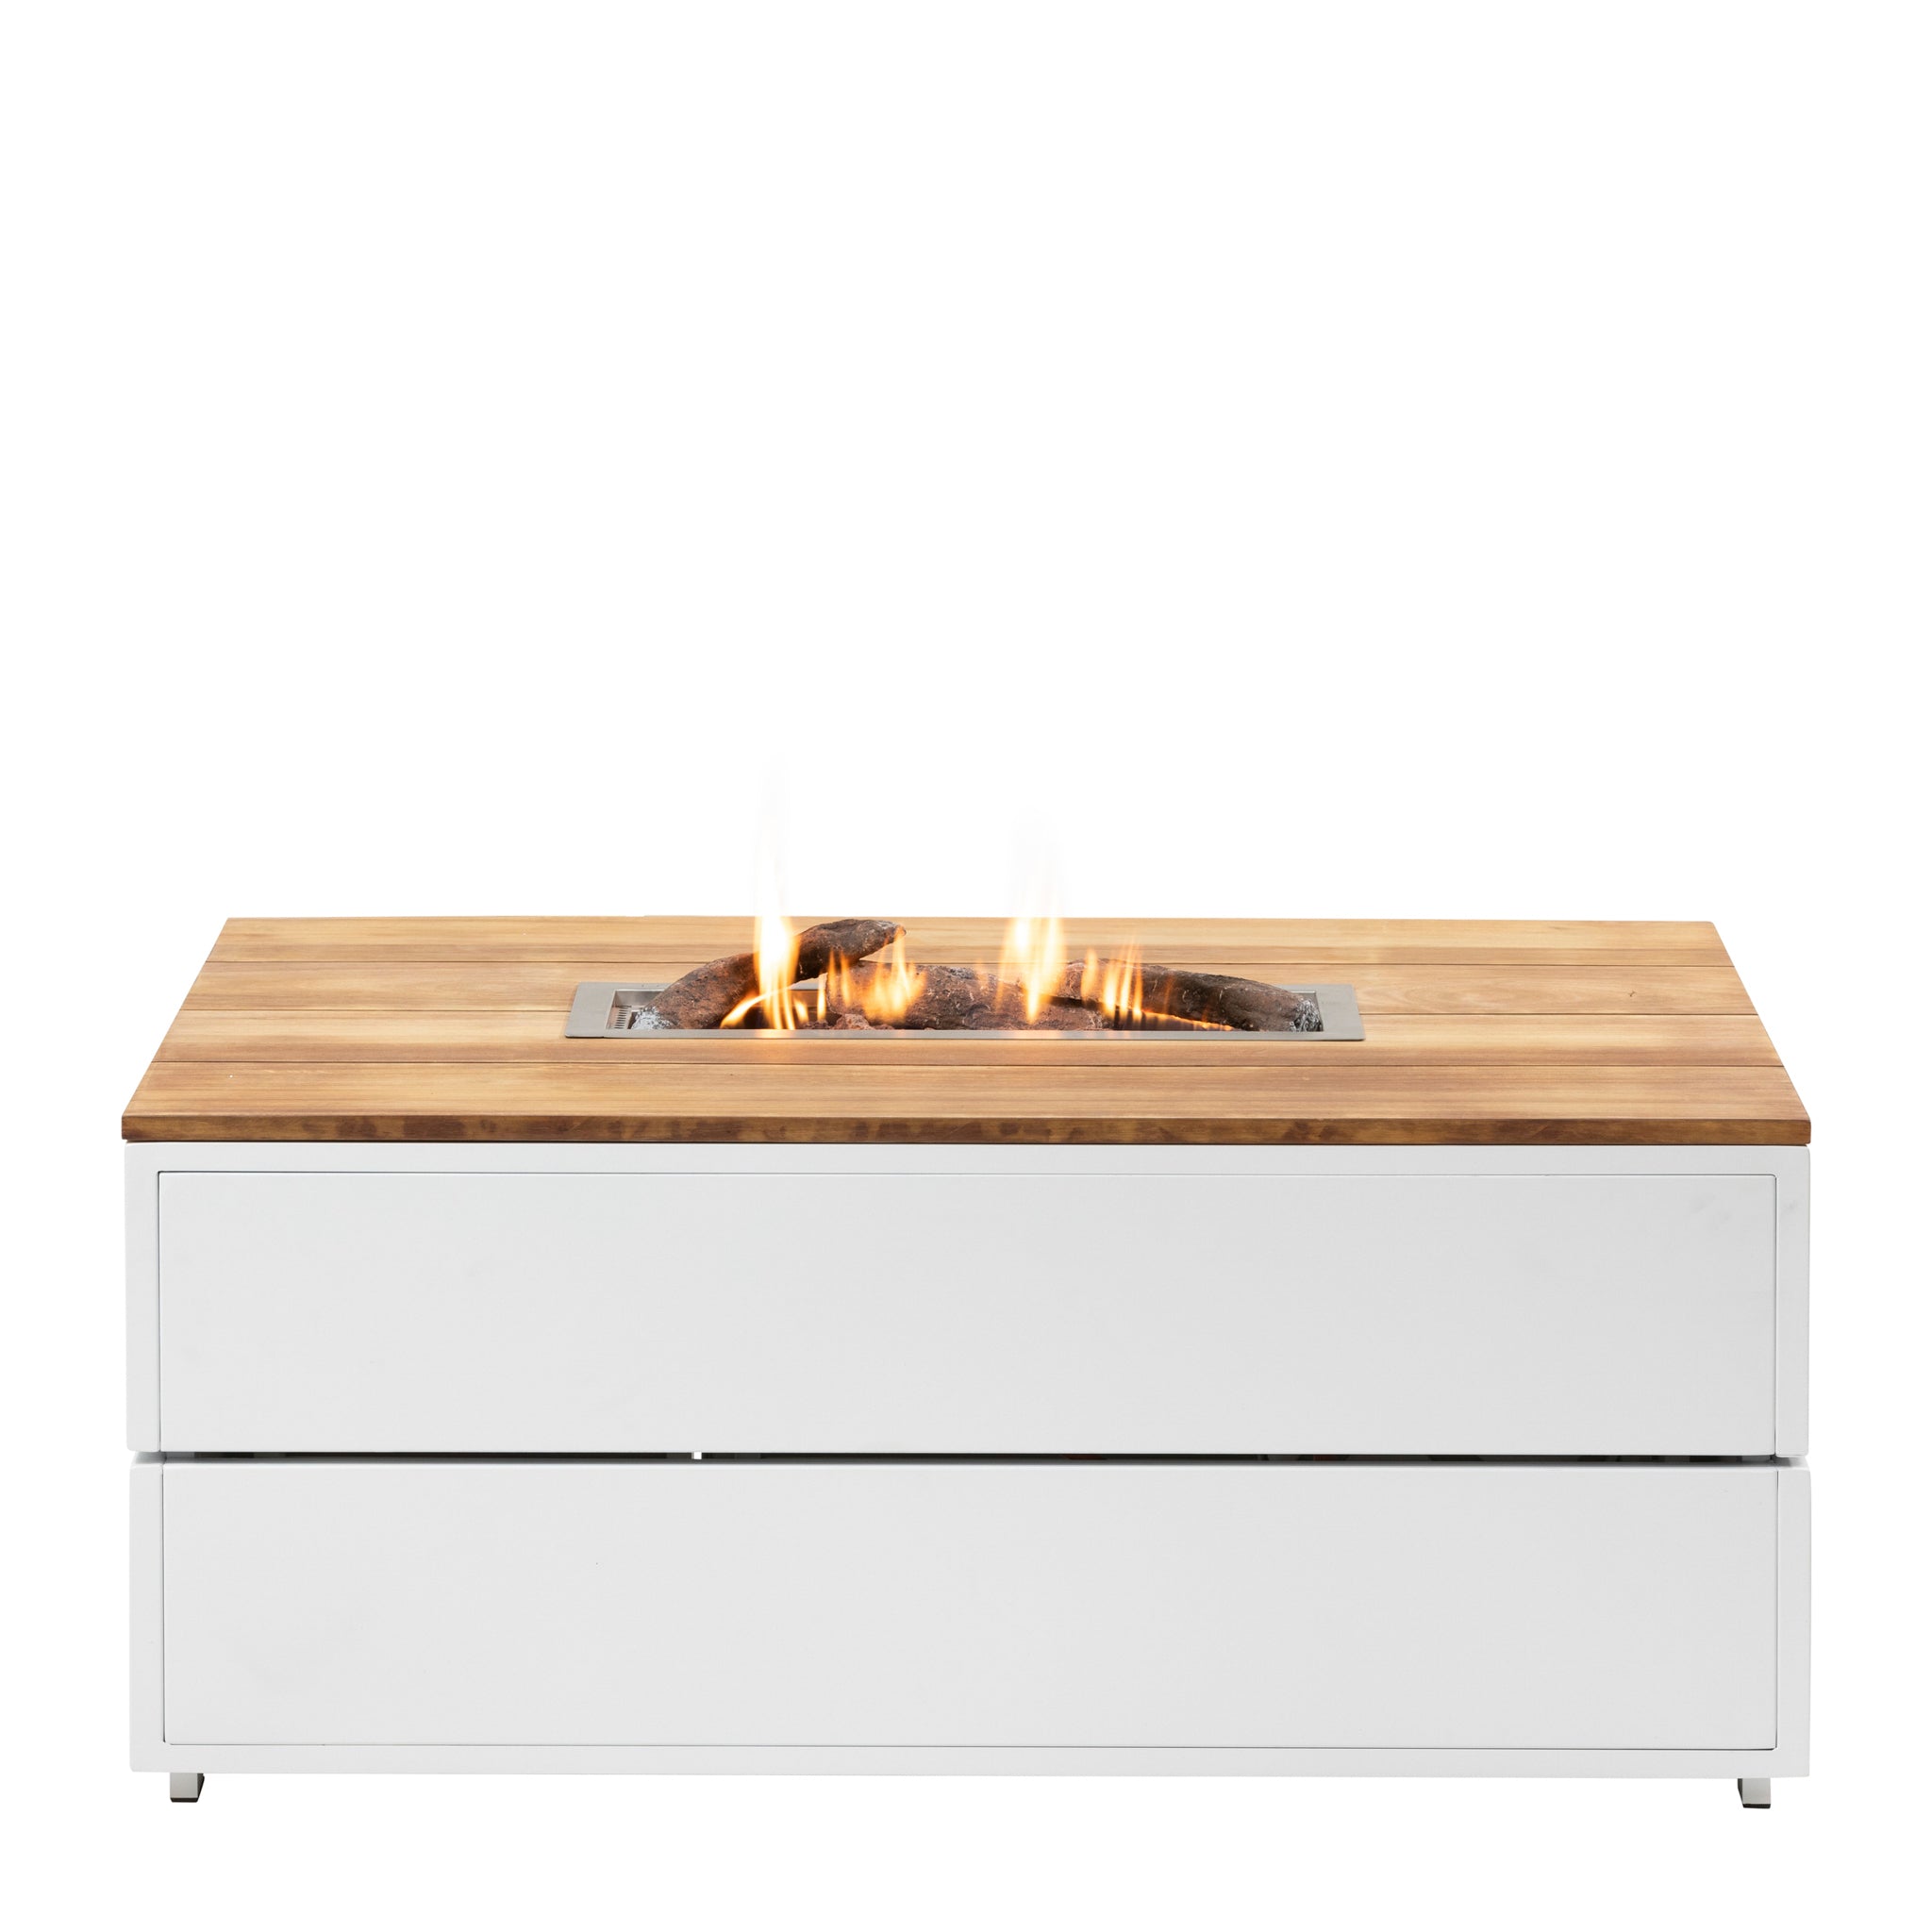 Cosipure 120 White and Teak Rectangular Fire Pit